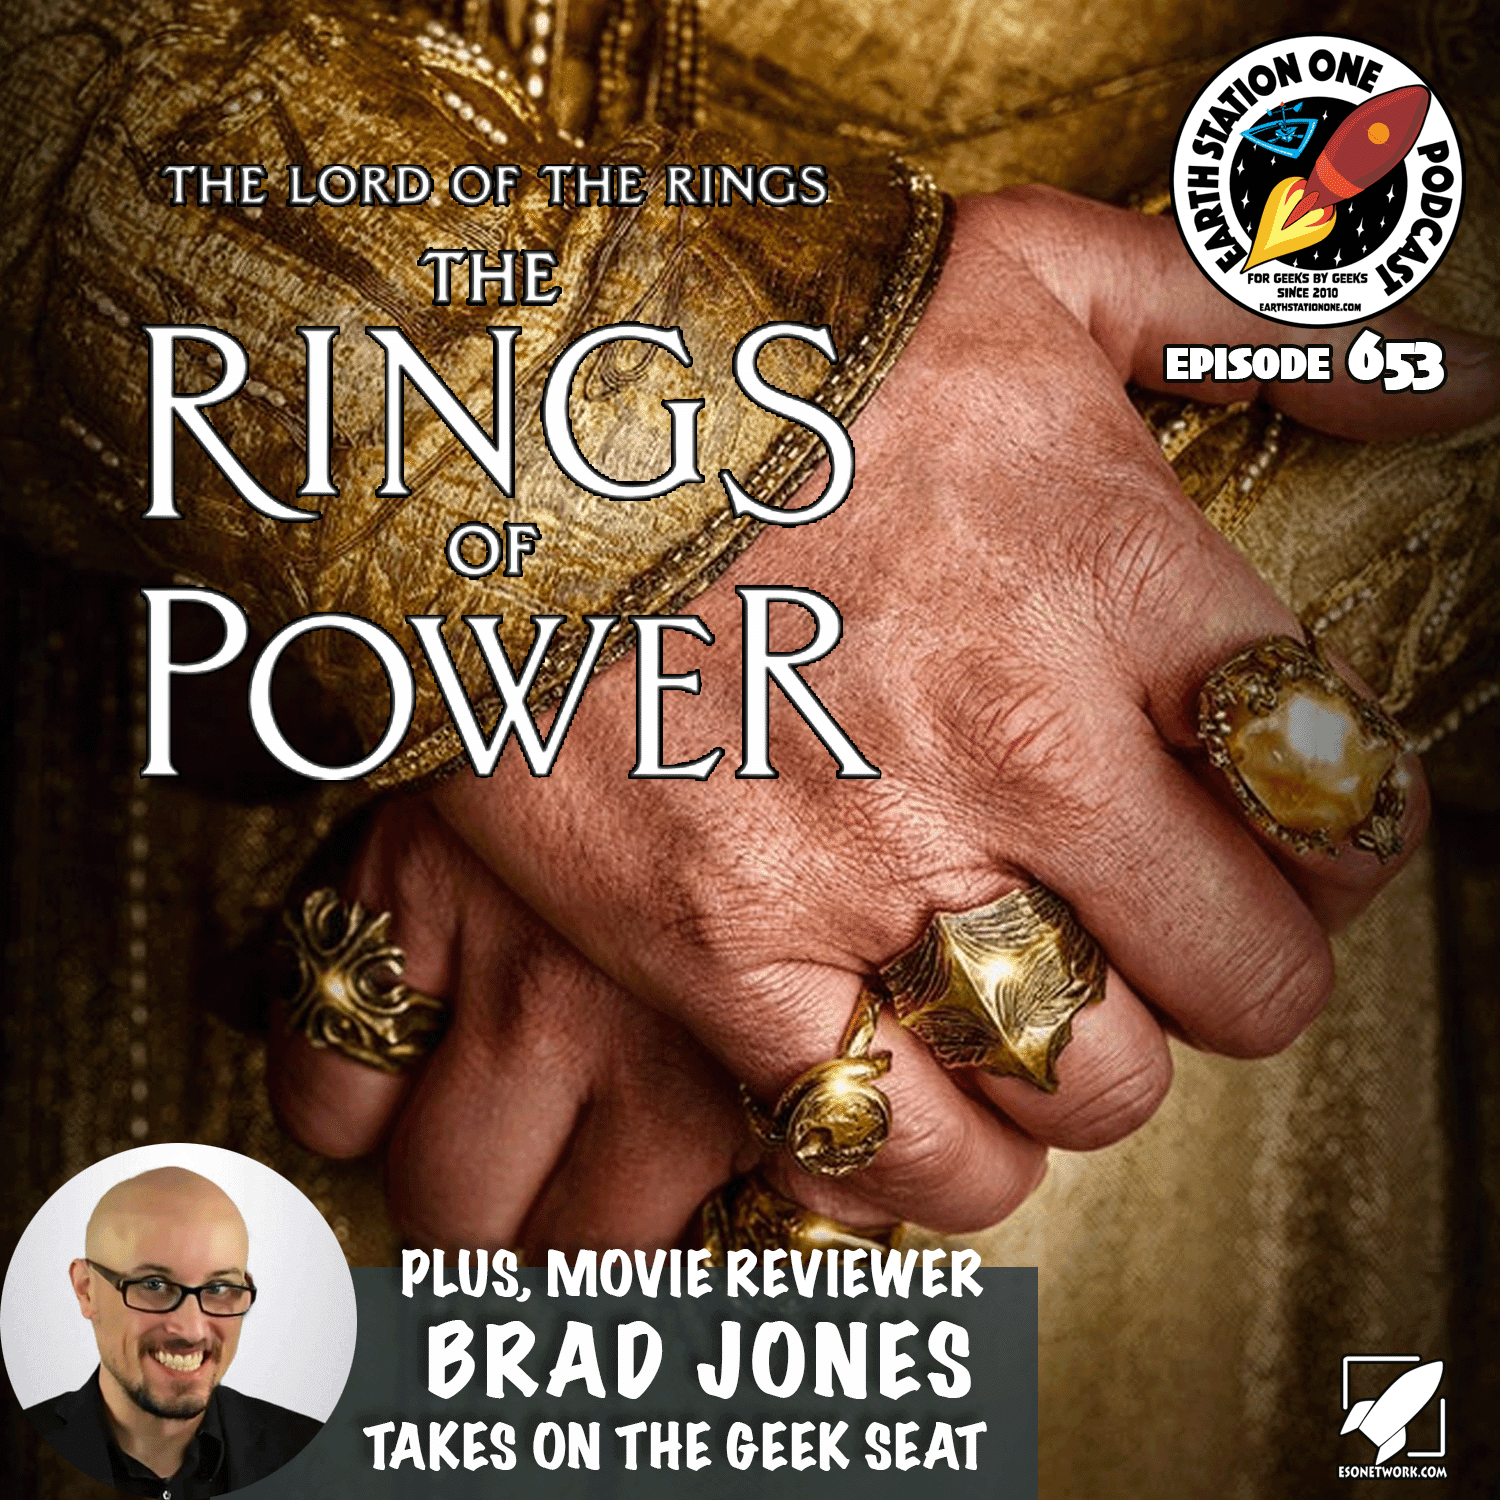 Earth Station One Ep 653 - The Lord of The Rings: Rings of Power Season One Review